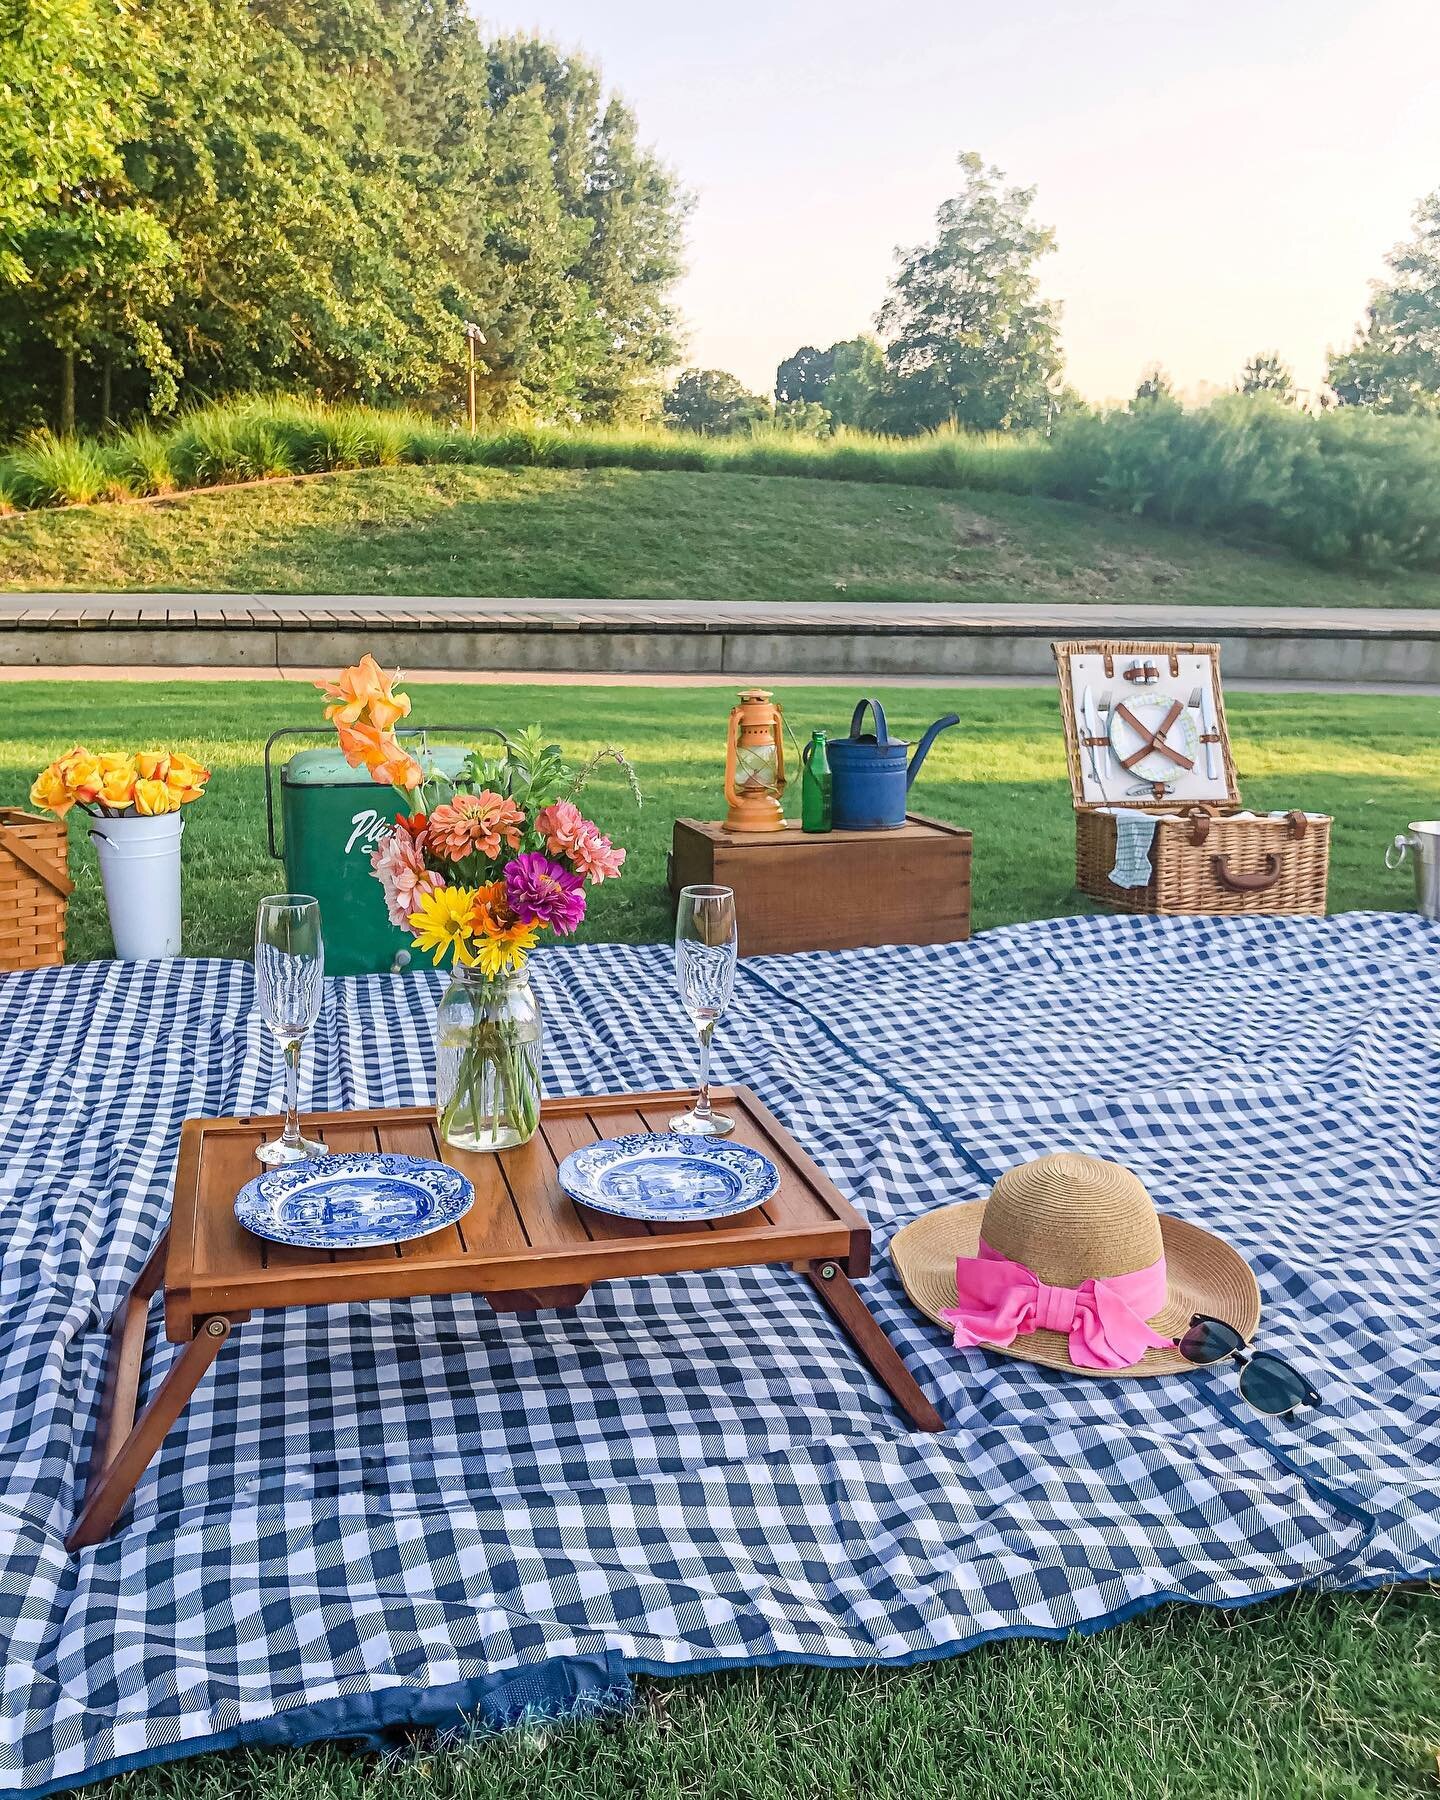 Summertime &amp; the living is easy 💚.

We have openings for this weekend on Friday evening, Saturday &amp; Sunday. Message us or visit our website to book. 

#raleighpicnic #raleigh #raleighevents #raleighevent #raleigheventplanner #wraloutandabout